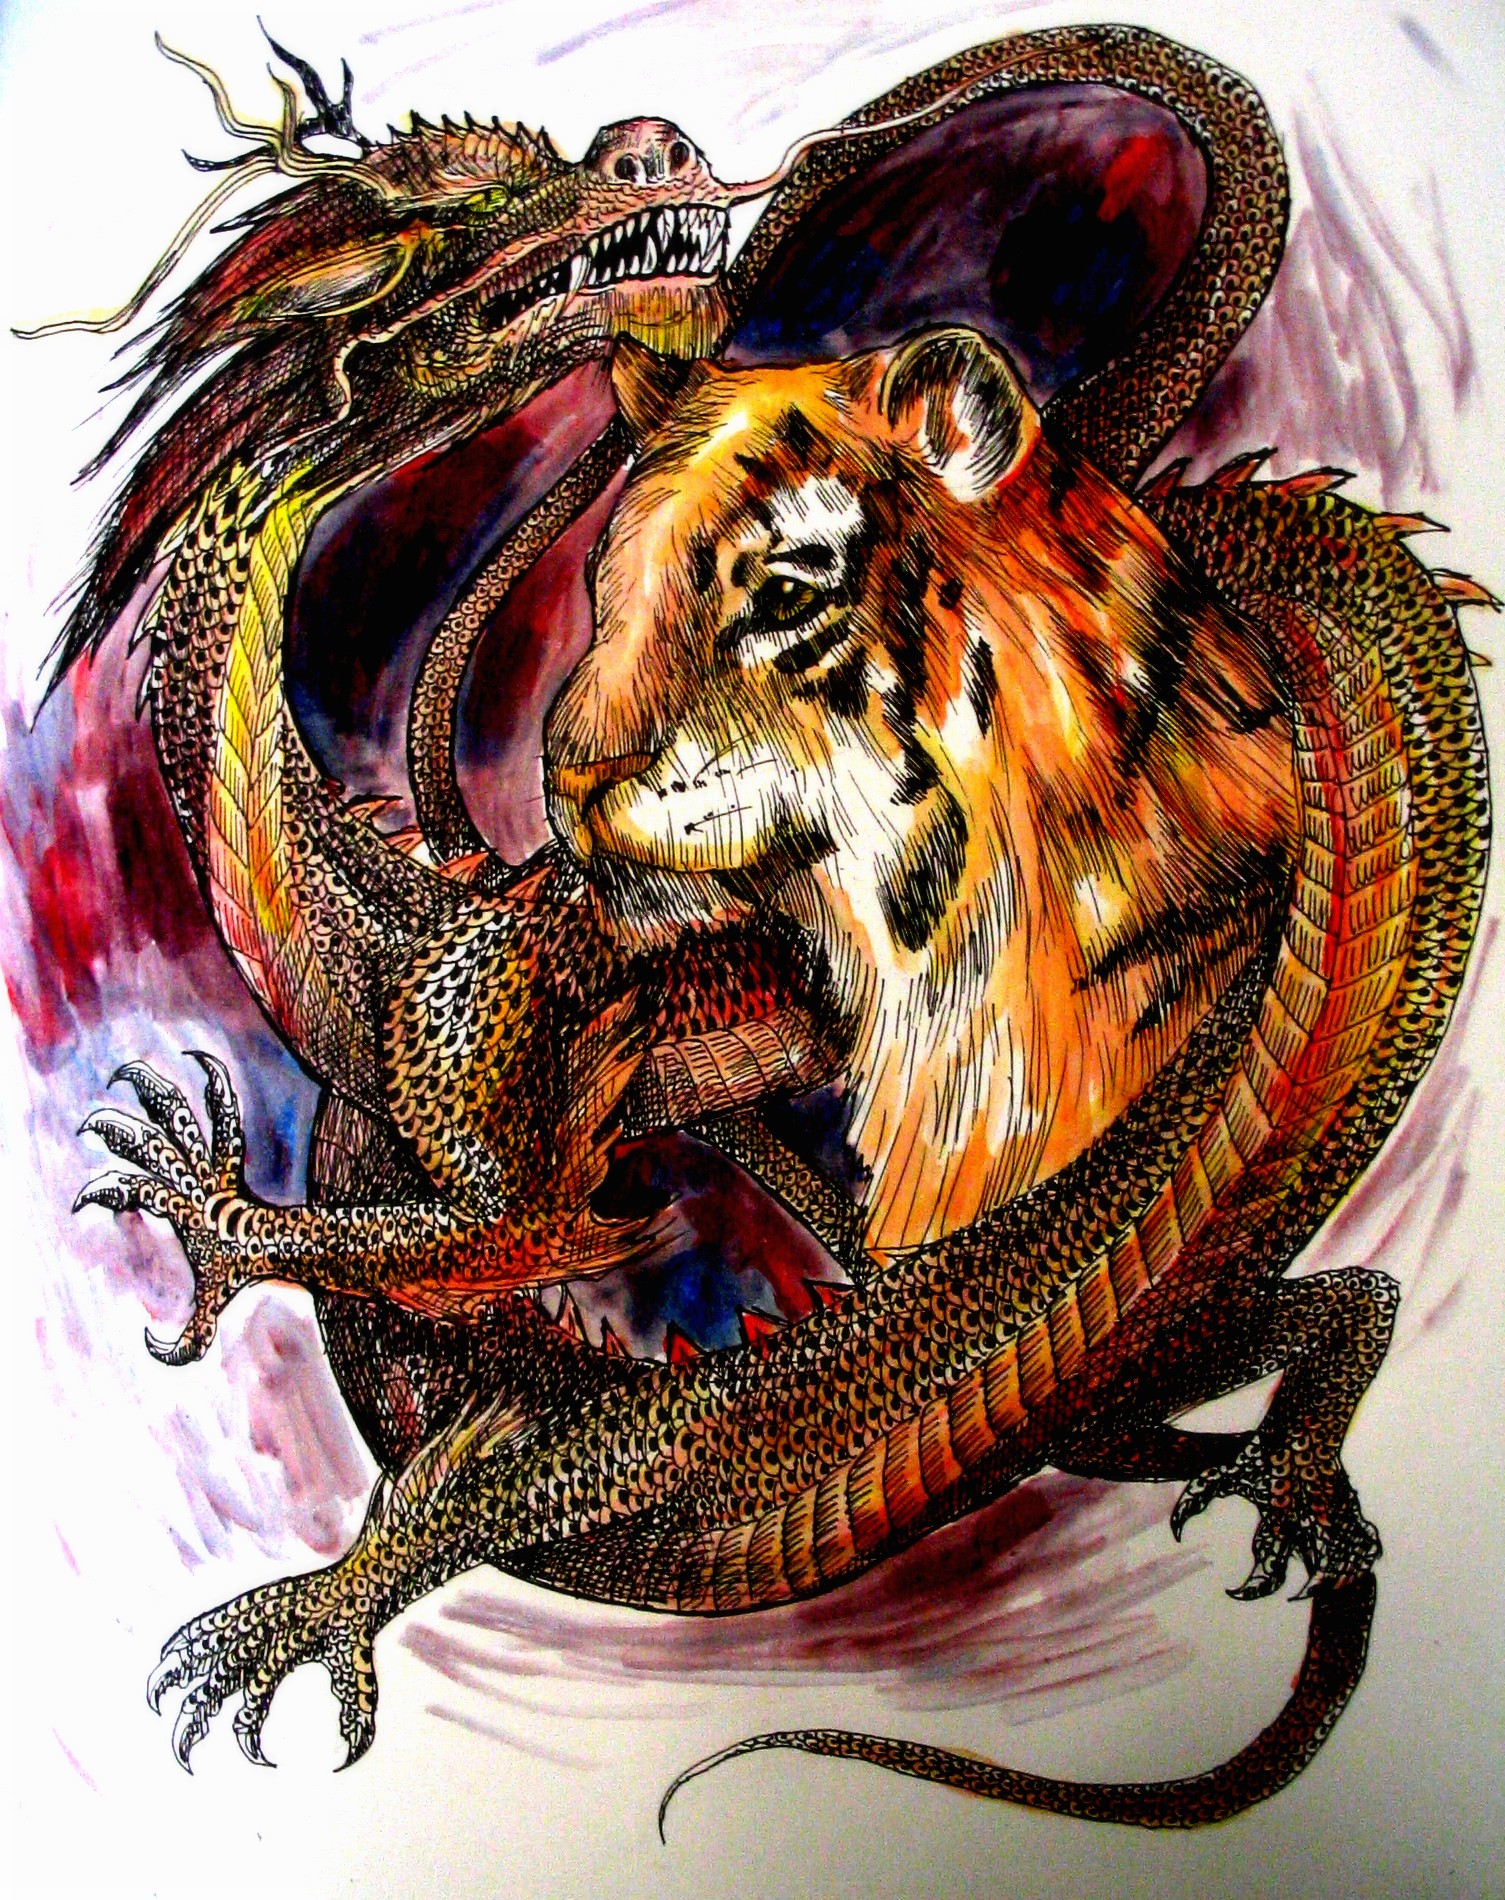 Free download Tiger Vs Dragon Wallpaper Dragon and tiger by [1505x1900] for your Desktop, Mobile & Tablet. Explore Dragon and Tiger Wallpaper. Dragon Yin Yang Wallpaper, Tiger vs Dragon